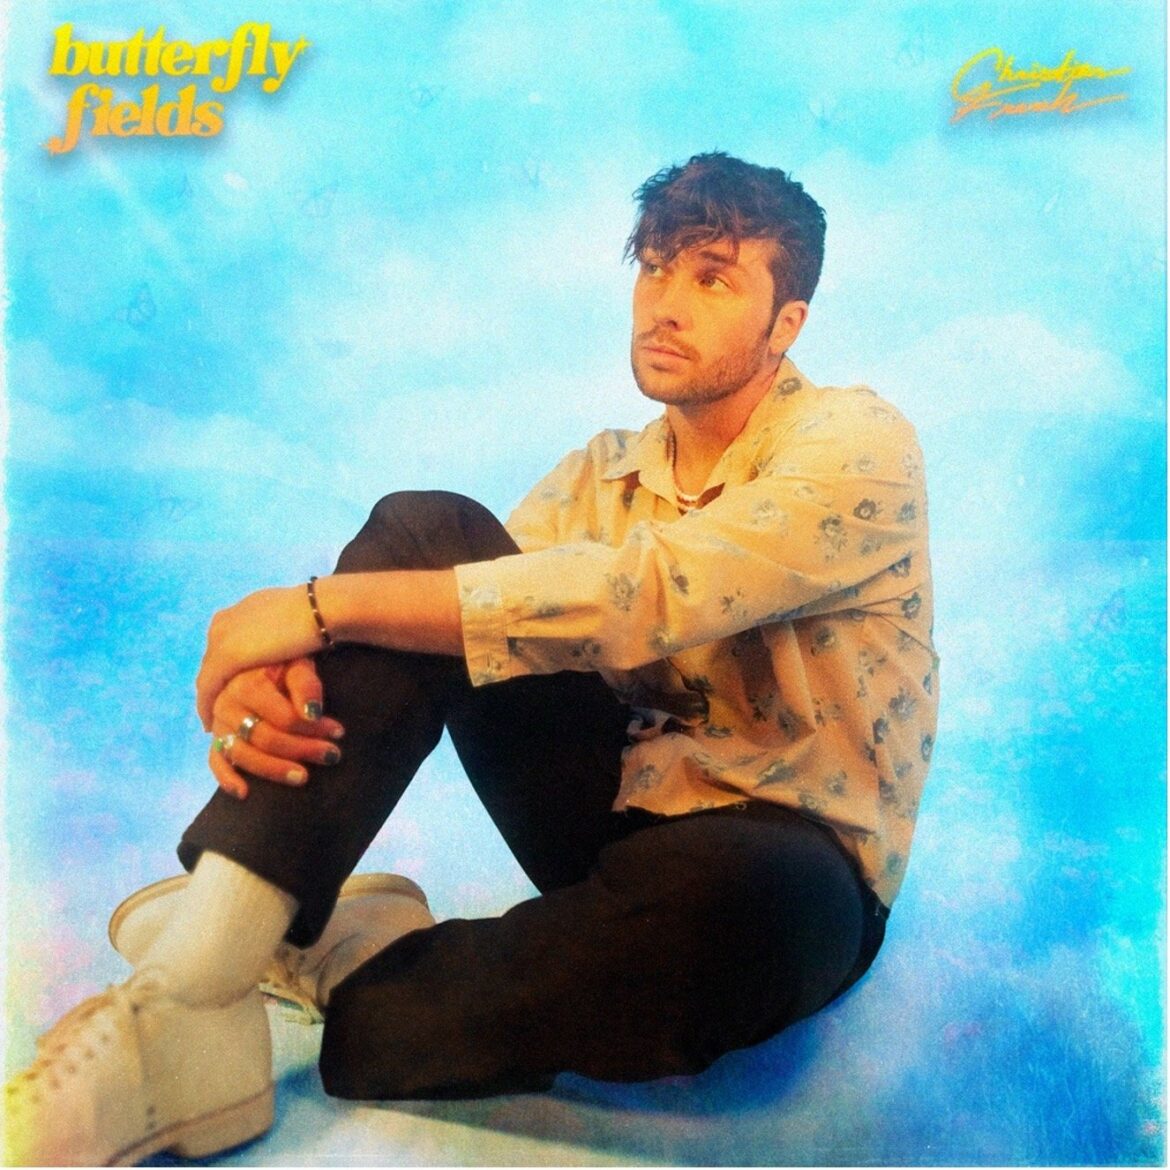 Christian French Displays Promising Evolution With Dreamy New Single “butterfly fields”